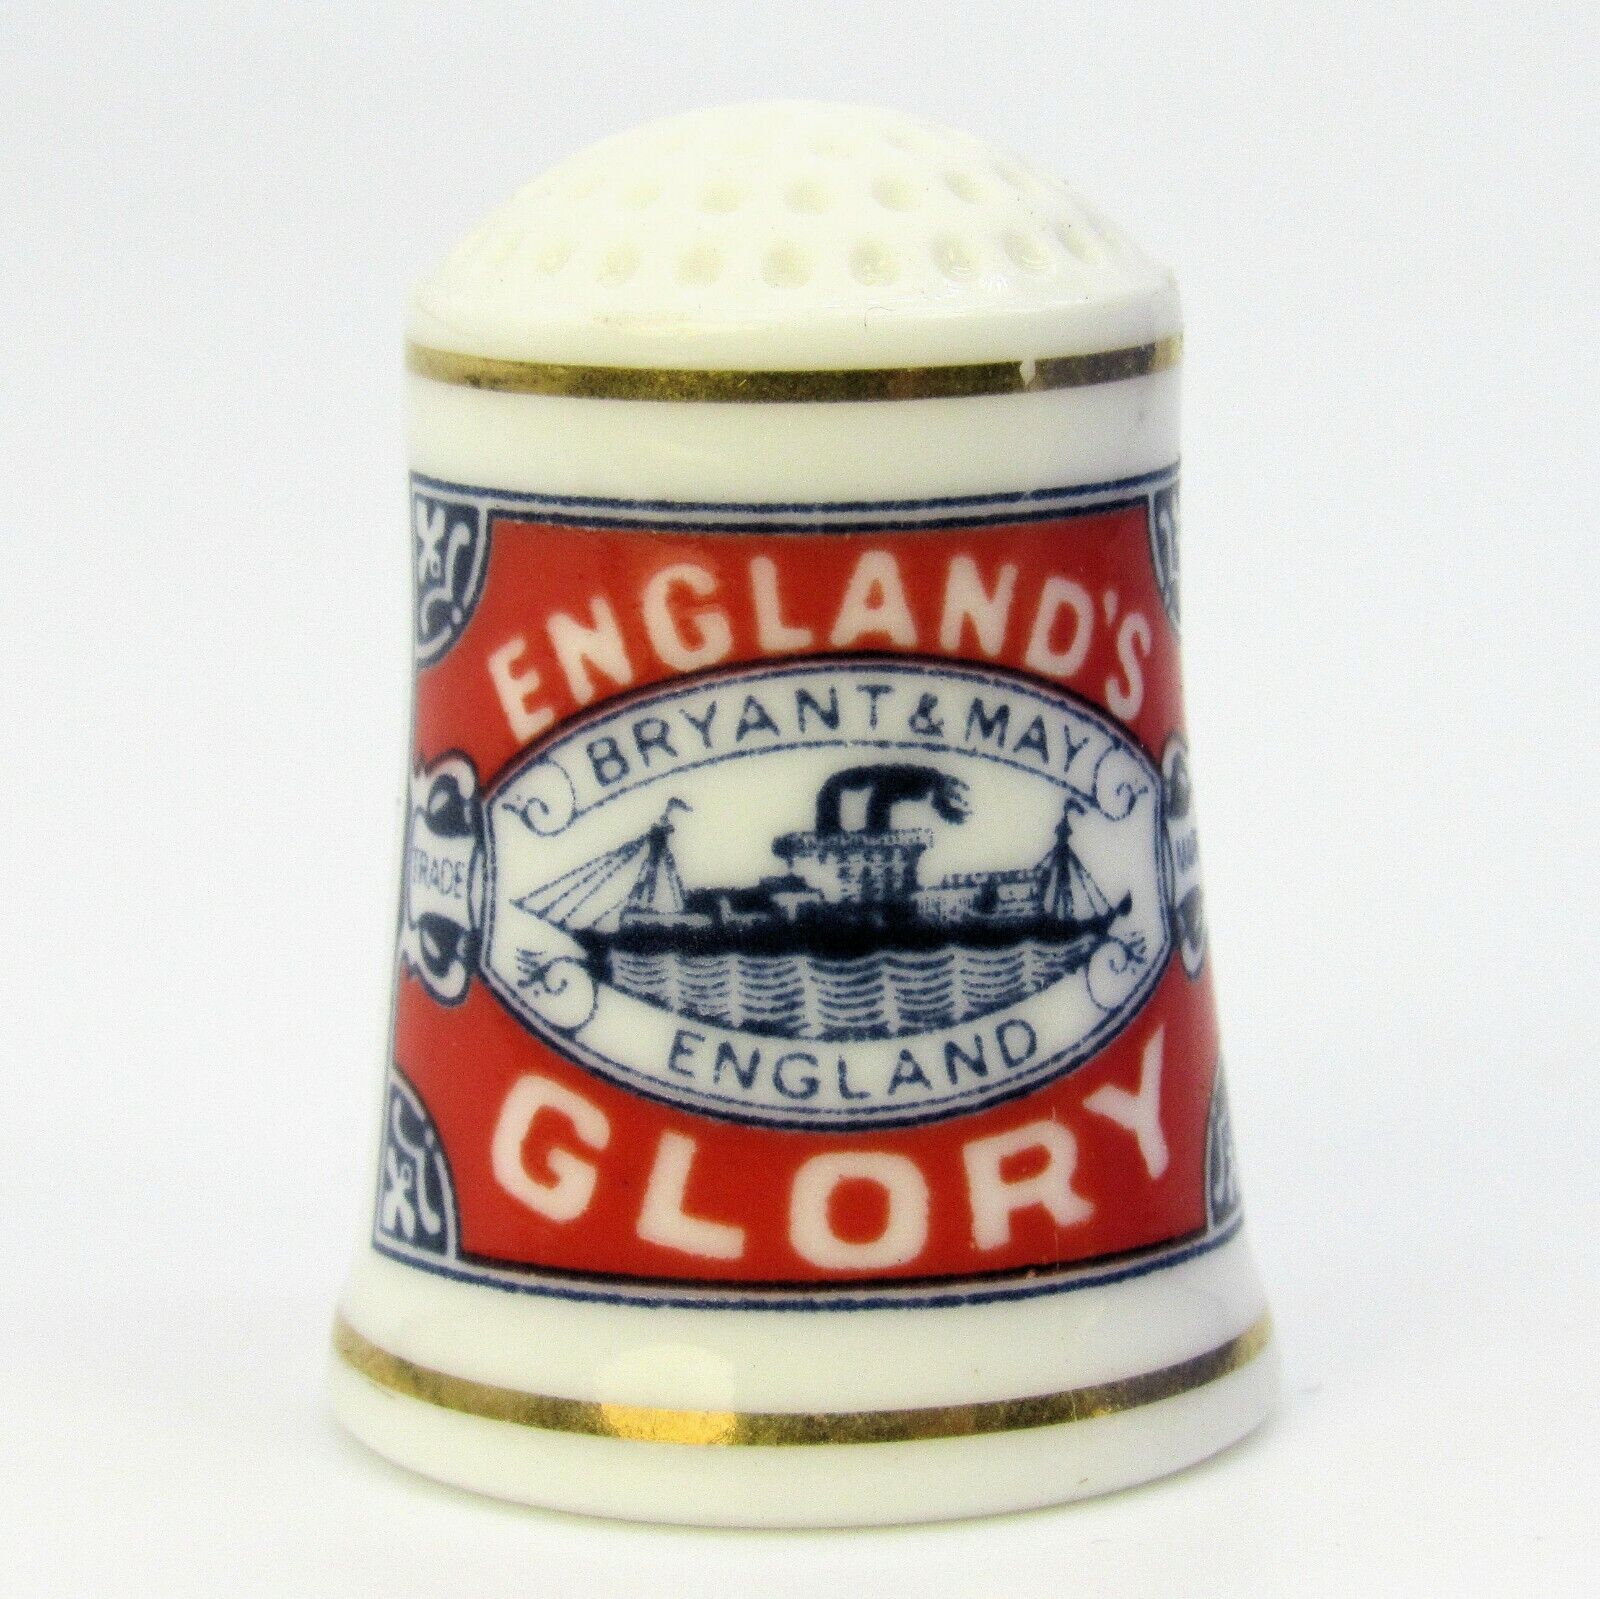 FINE PORCELAIN THIMBLE \'ENGLAND\'S GLORY, BRYANT & MAY\' BY FRANKLIN (TM226)